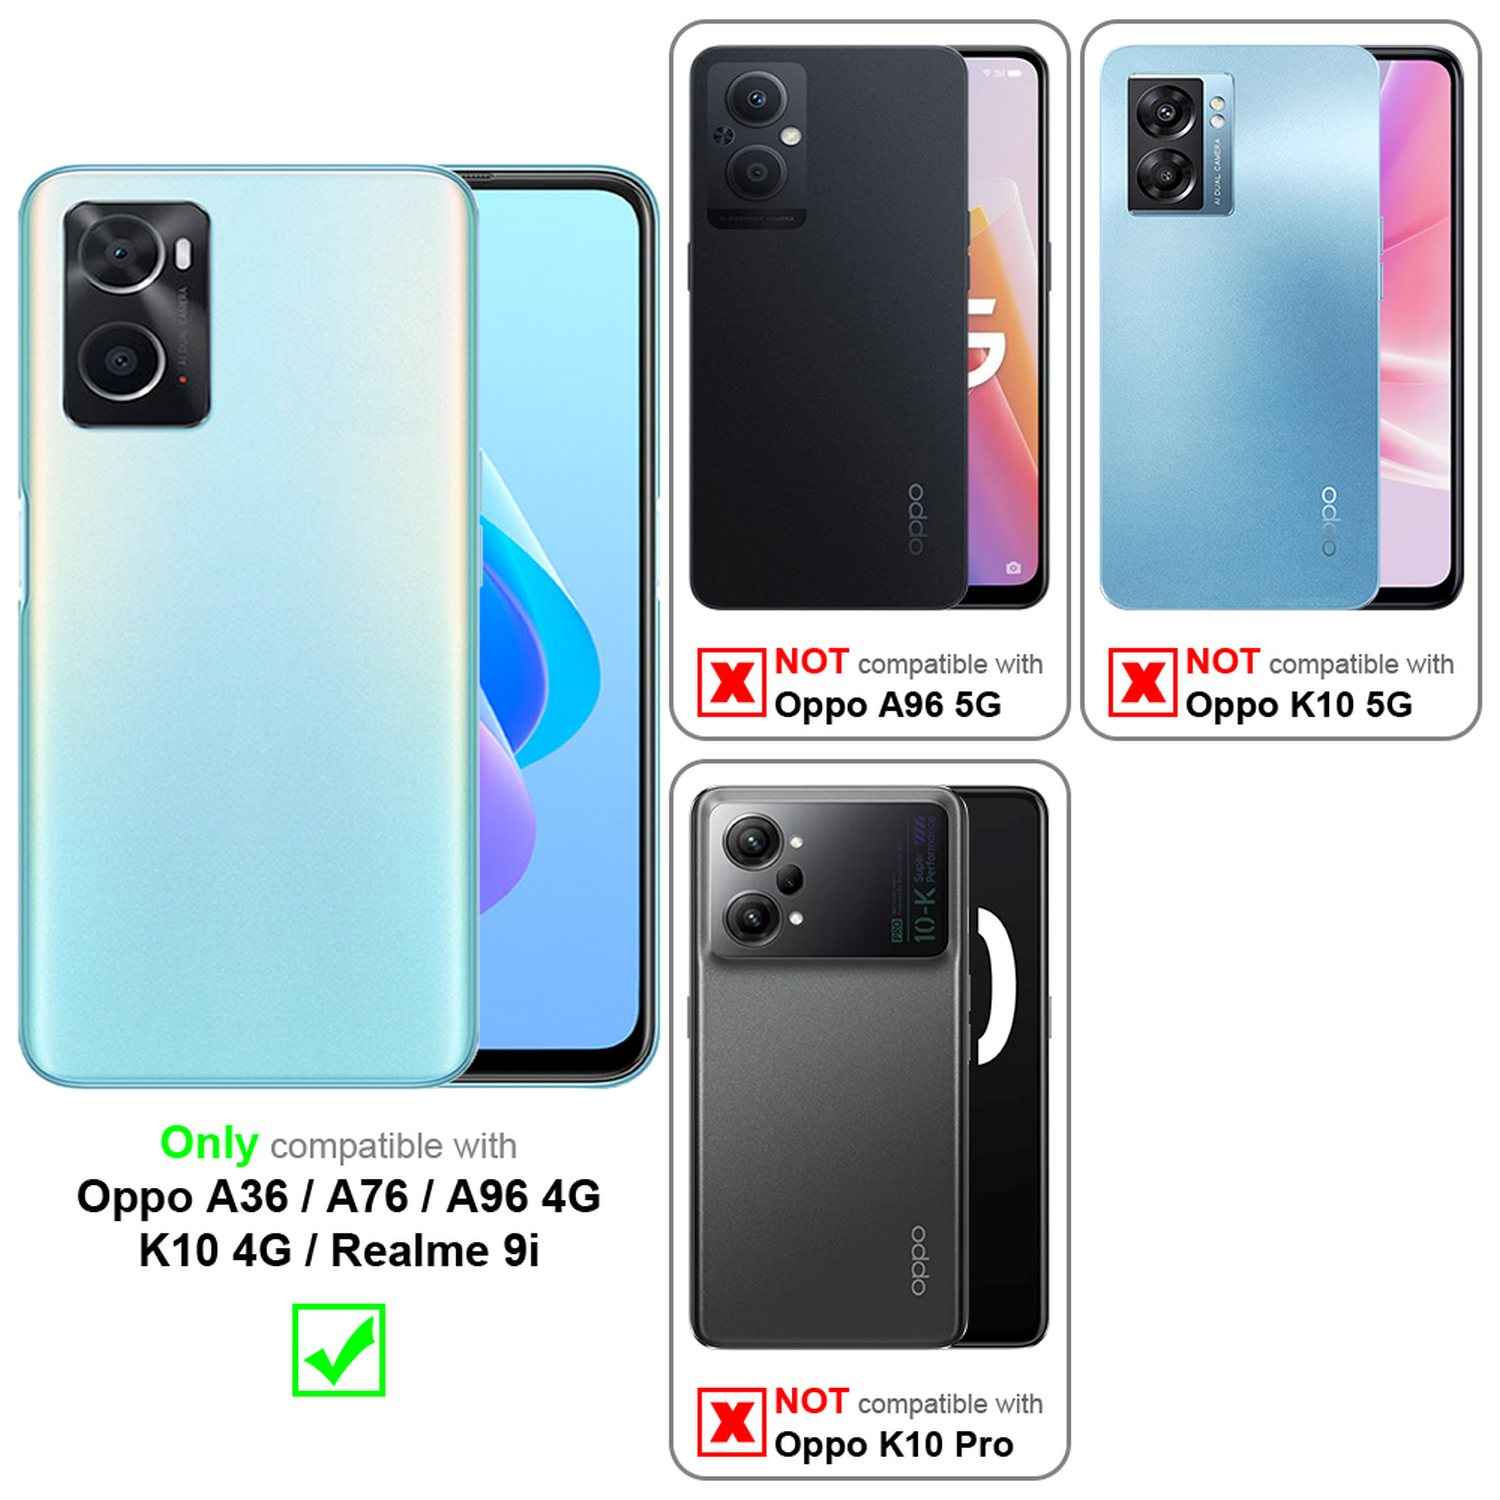 Candy 4G Hülle ROT CADORABO 4G / K10 9i, Realme A96 Oppo, A76 TPU Style, A36 / im / Backcover, CANDY /